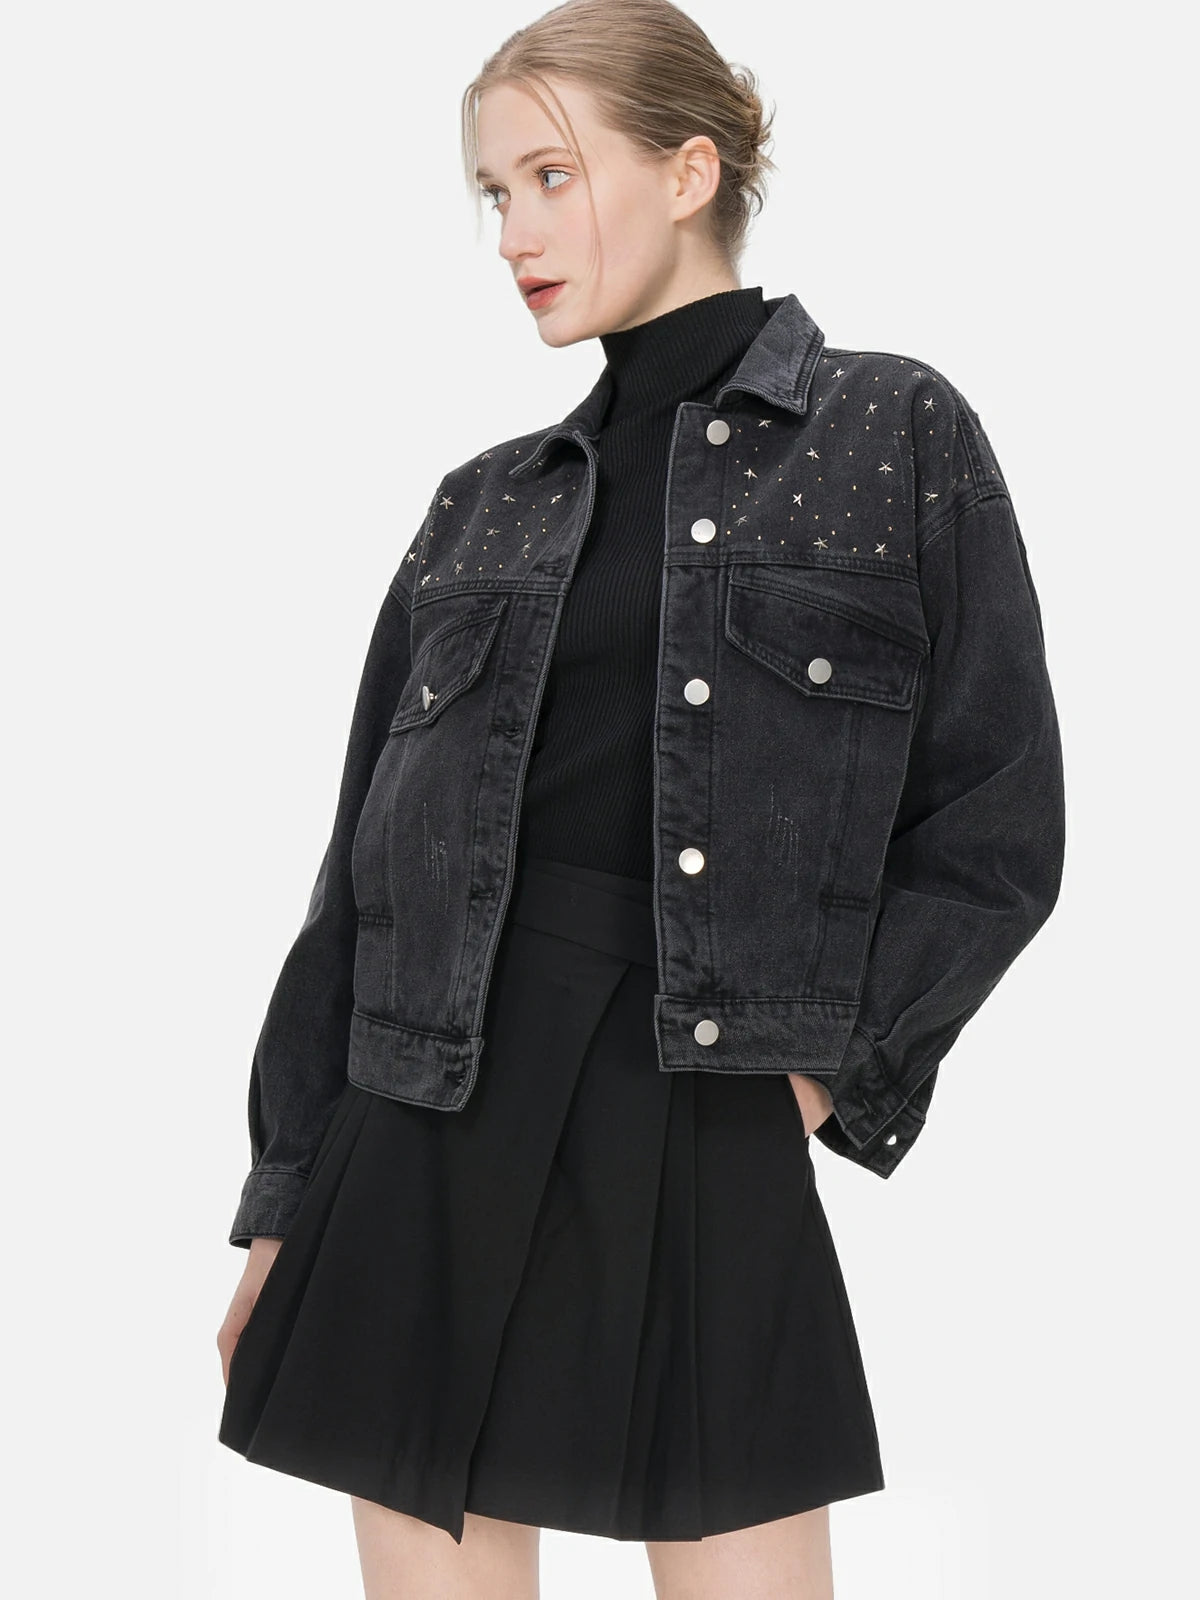 Explore a unique fashion experience with this short denim jacket, designed with star-shaped bead embellishments, offering a fashionable and individualistic look that stands out in any crowd.